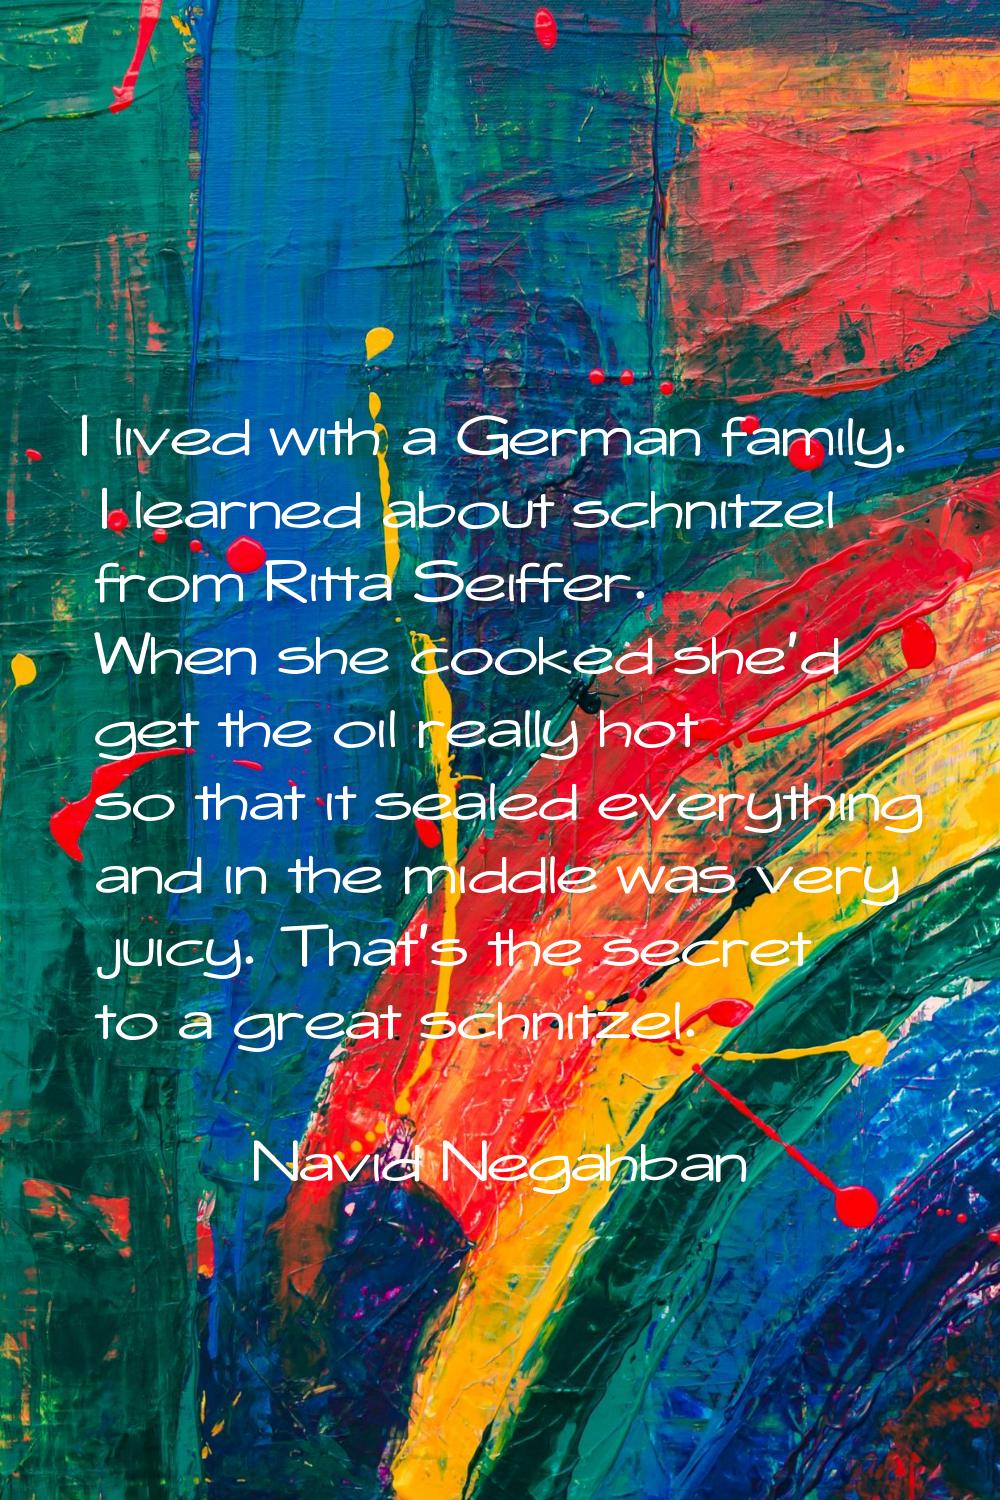 I lived with a German family. I learned about schnitzel from Ritta Seiffer. When she cooked she'd g